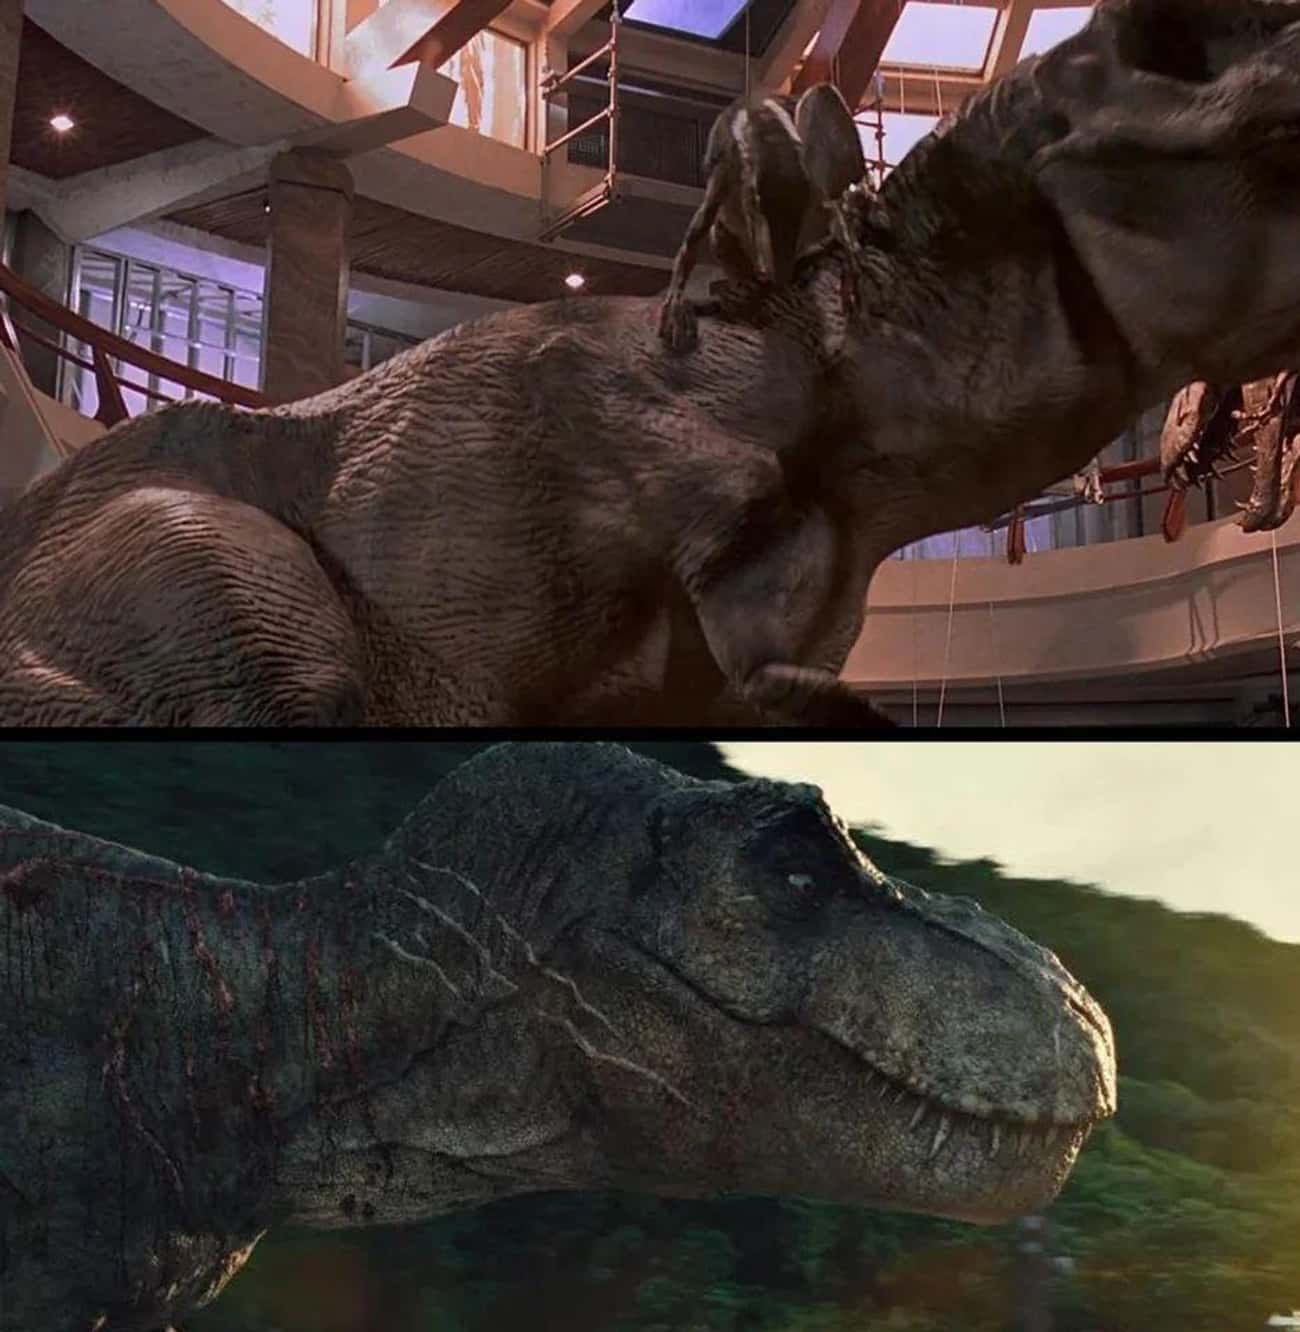 Scars From A Previous Installment In 'Jurassic World'